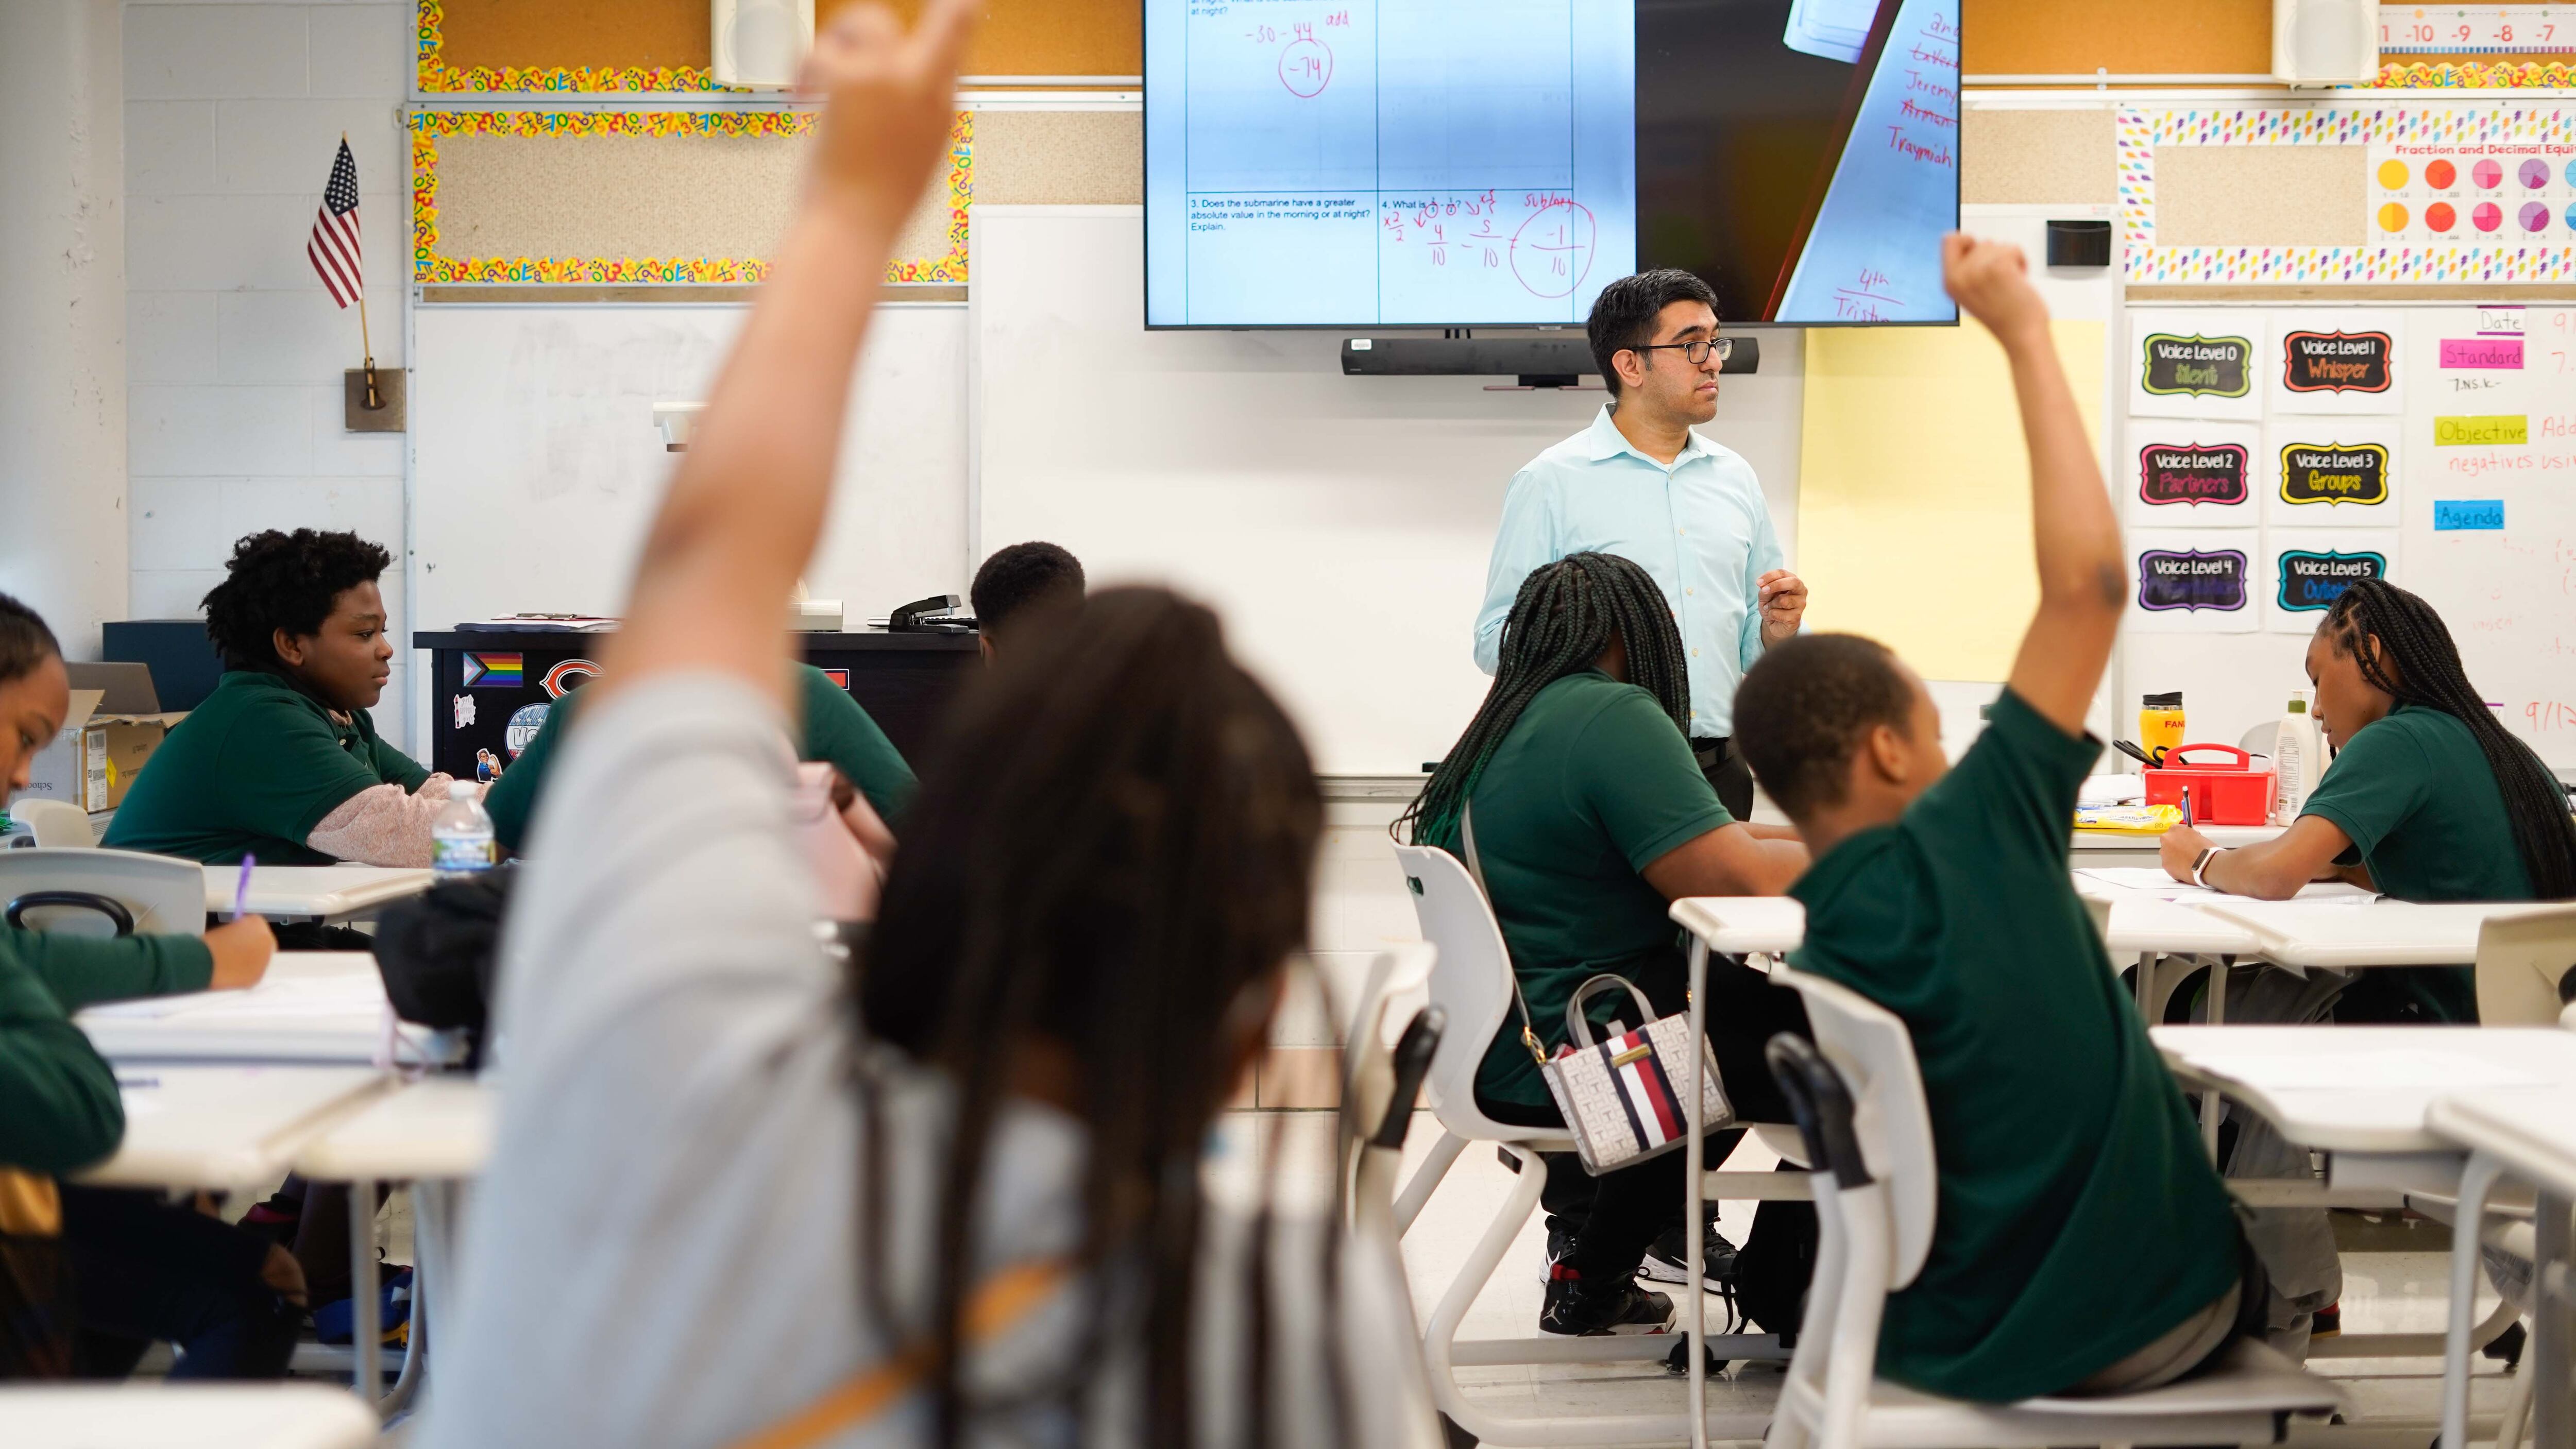 Two students raise their hands in class while a teacher wearing glasses and a blue shirt stand in the background looking at a classroom full of students.